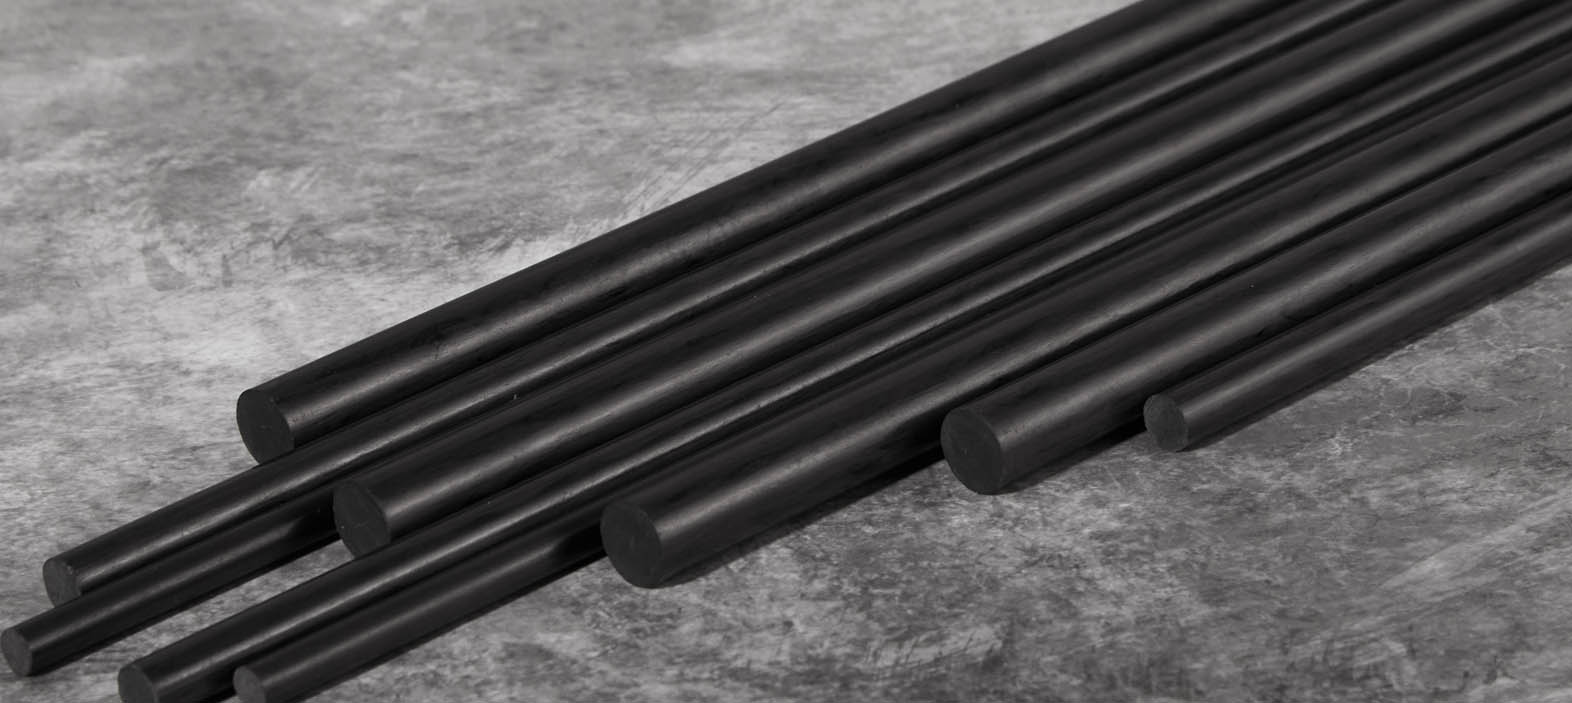 Analyzing the Weight-to-Strength Ratio of Carbon Fiber Rods